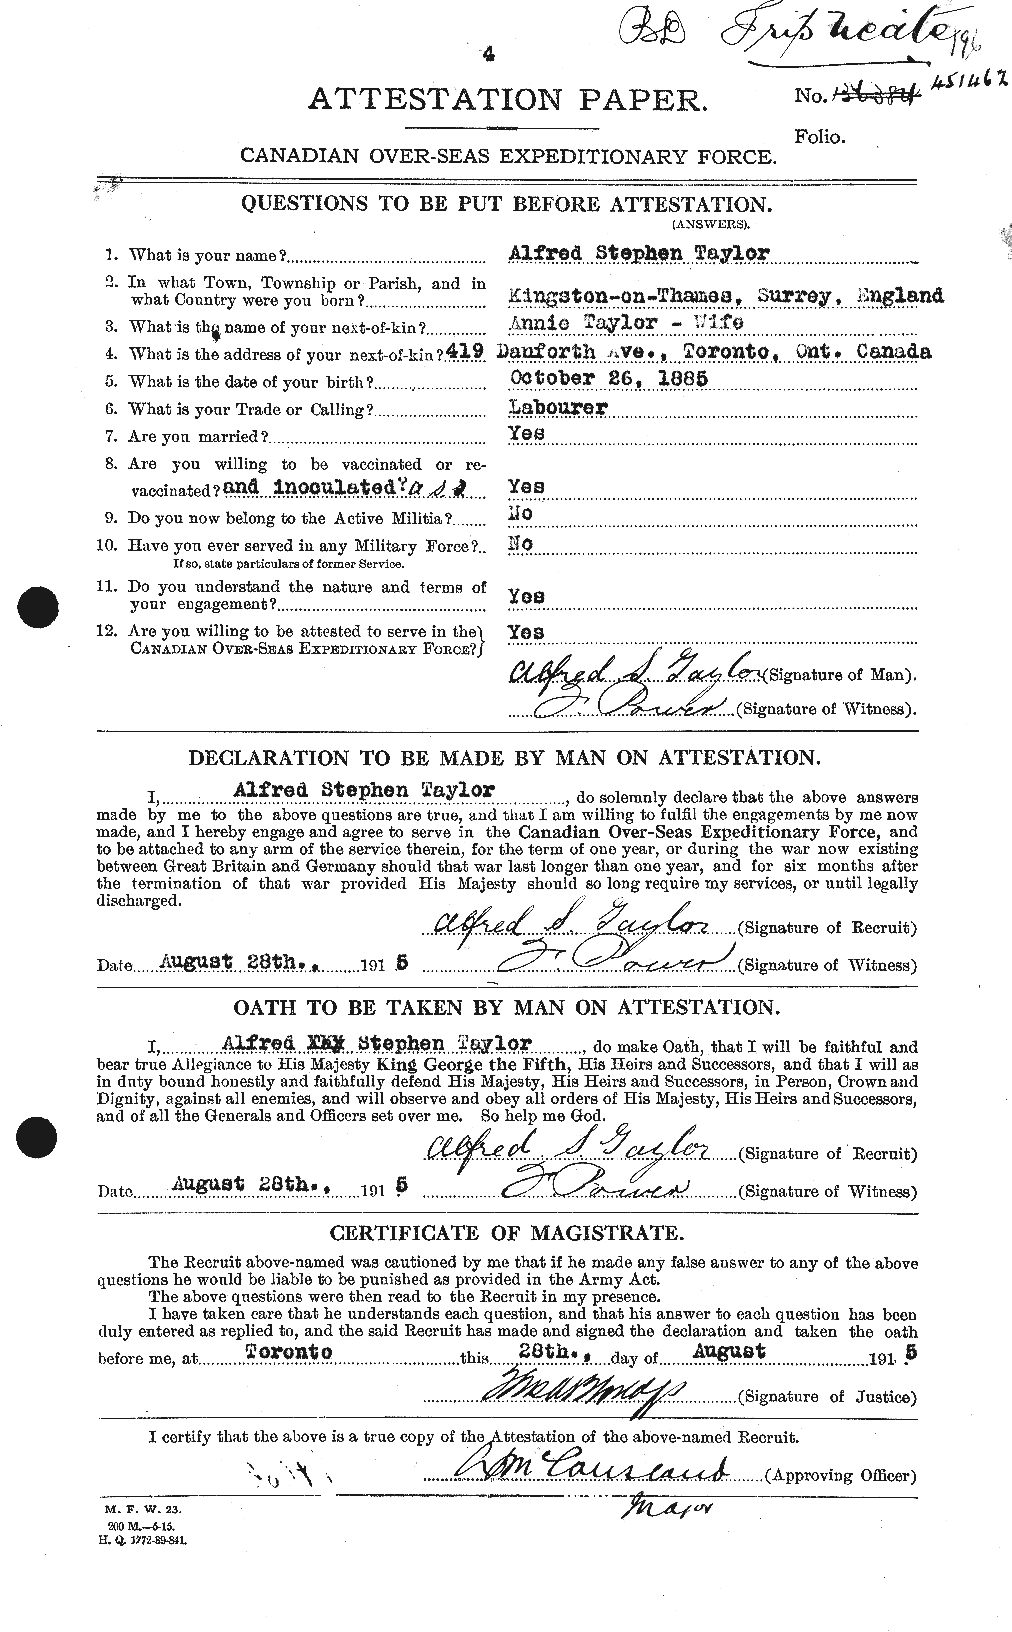 Personnel Records of the First World War - CEF 626196a